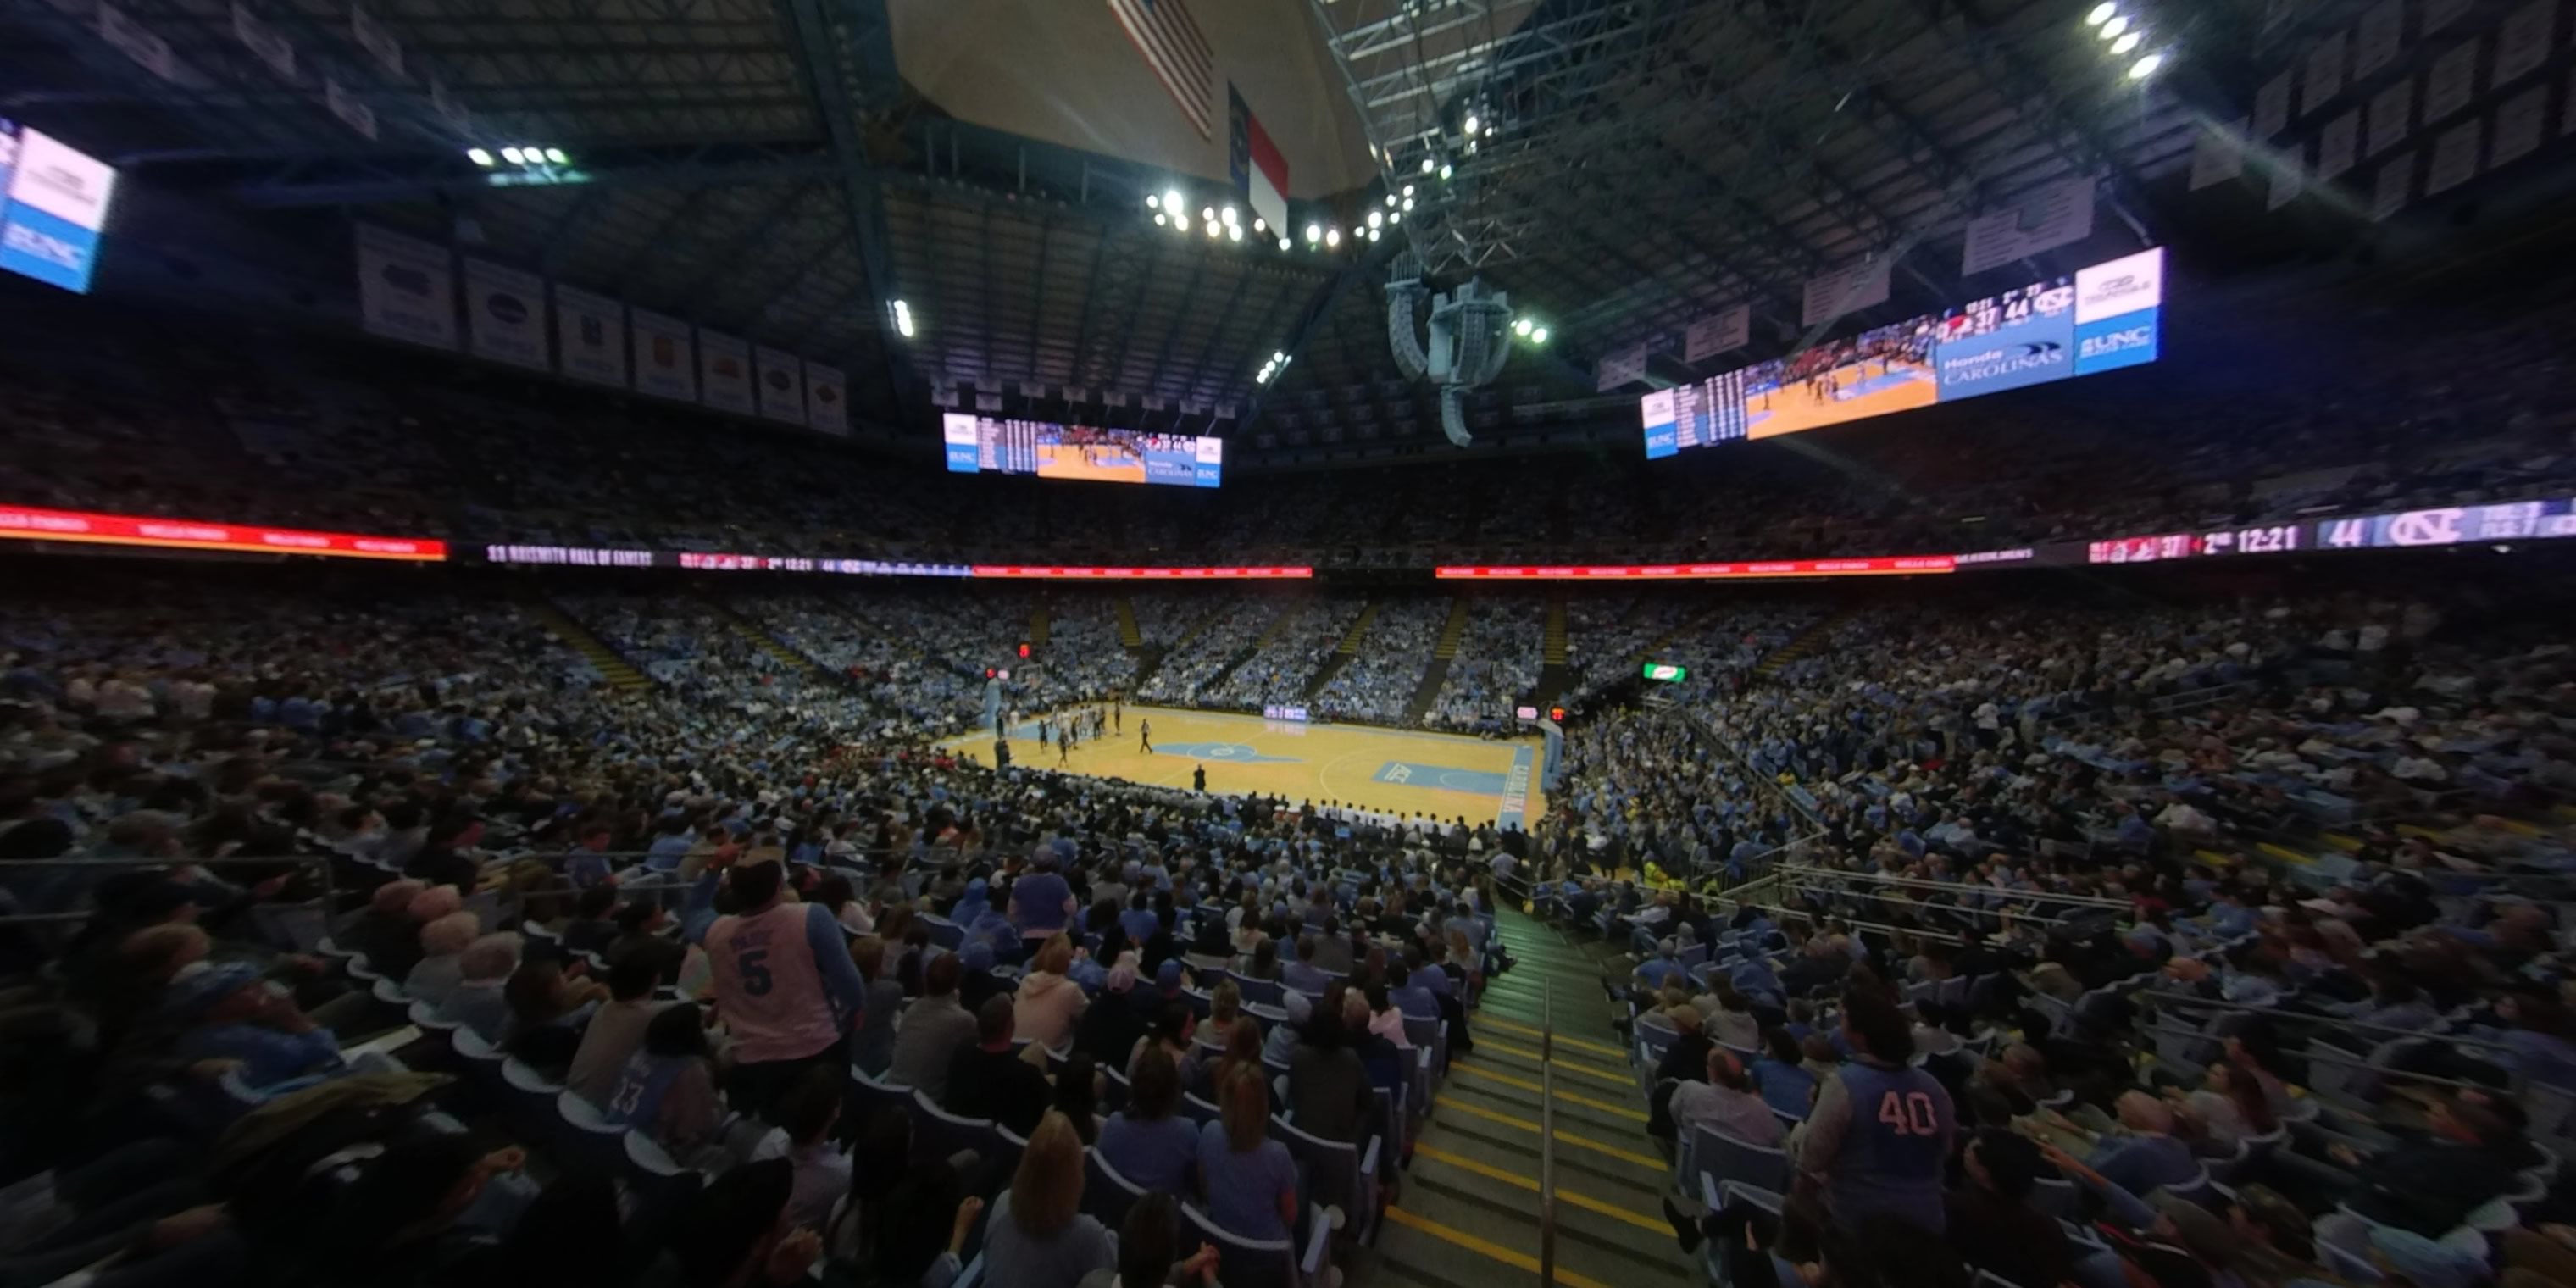 section 110 panoramic seat view  - dean smith center